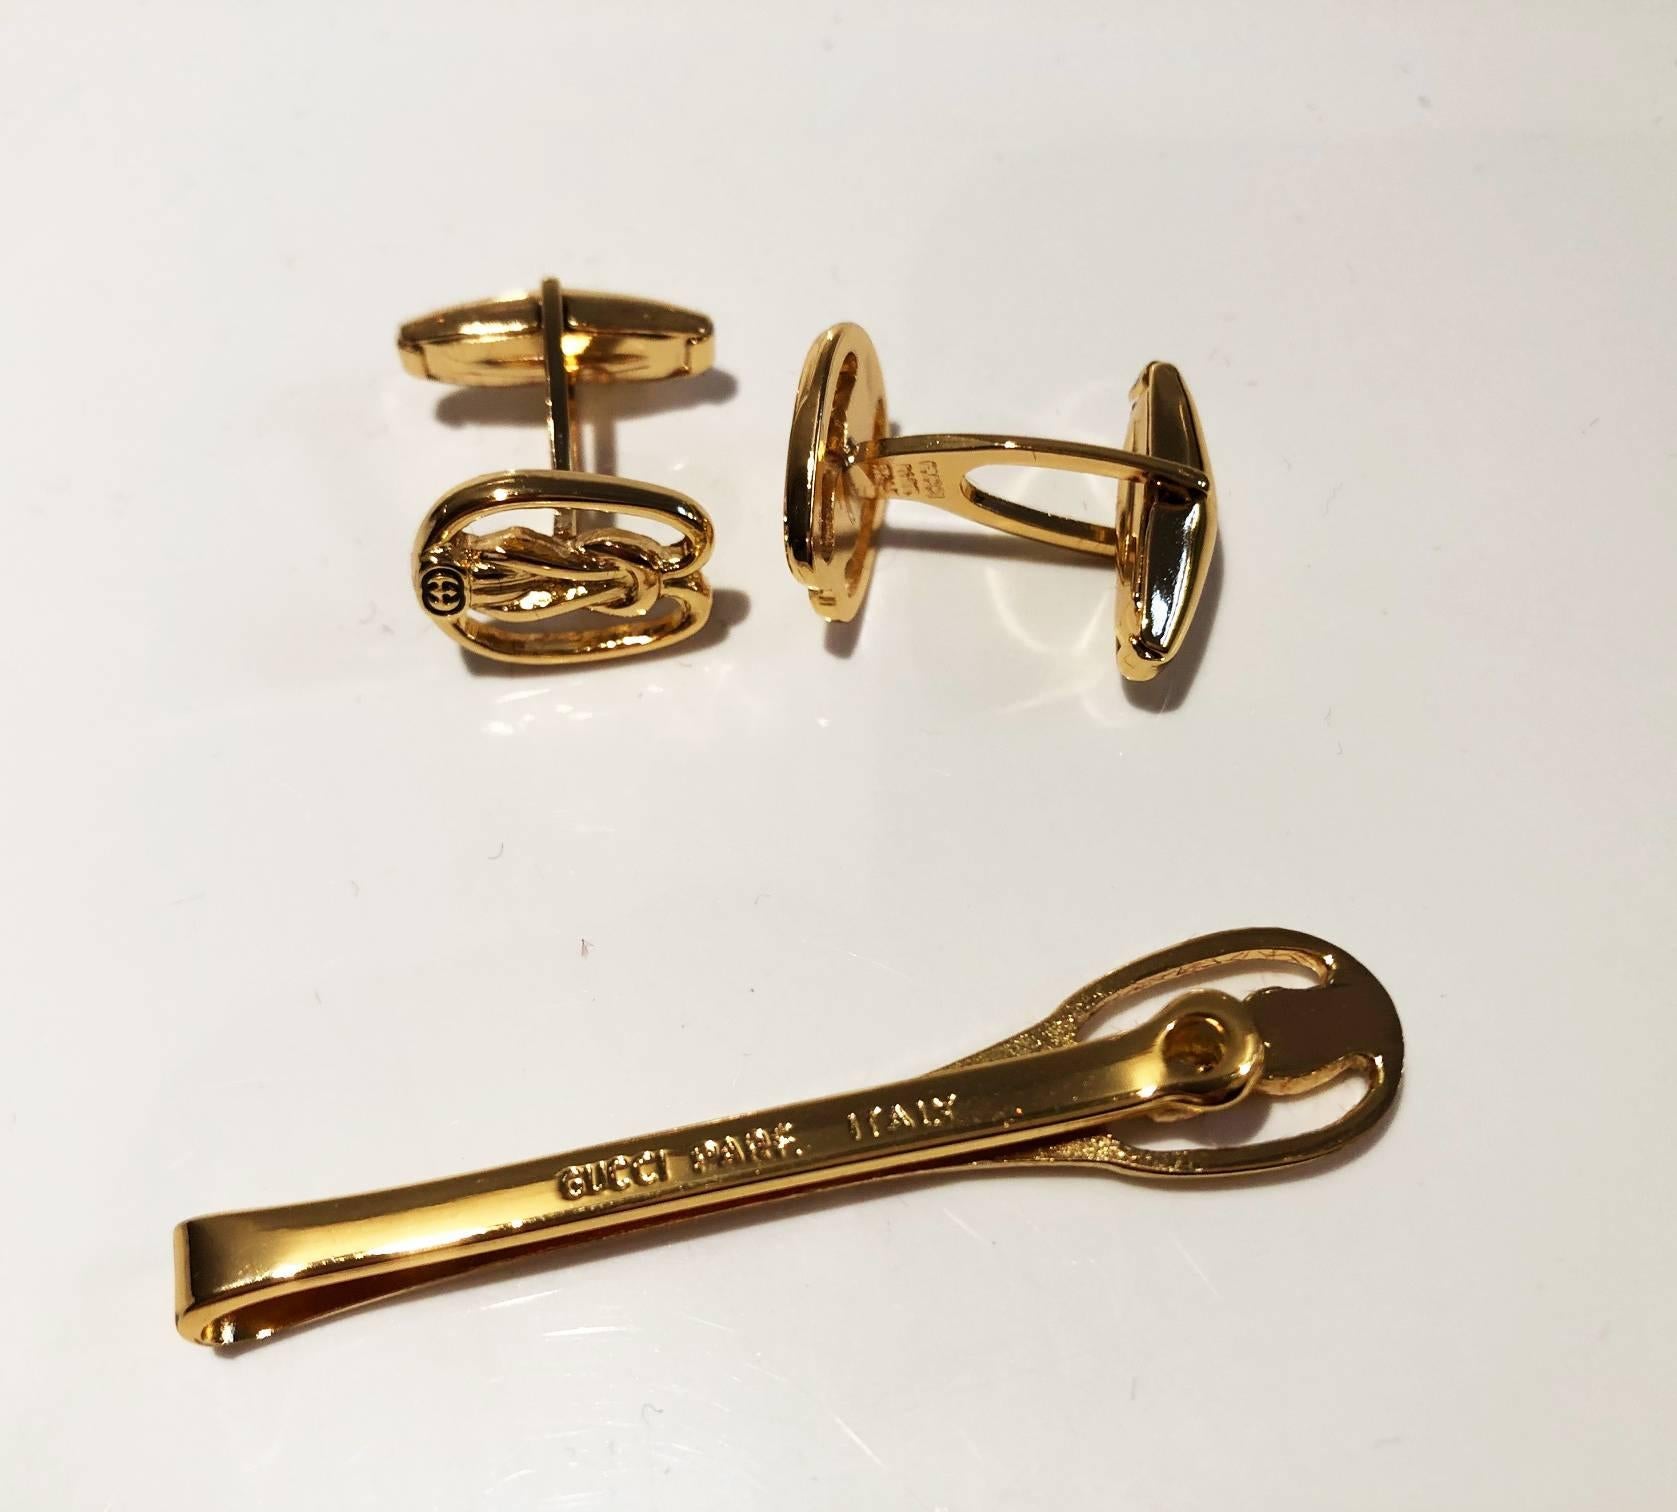 Vintage Signed Gucci cufflink and tie clip set in gold tone, GG interlocking logo on black background, stylish set for both men and women 
 
Measurements: Cufflink heads measure approx. 1.5cm x 1.2cm at their widest point; Tie clip measures approx.